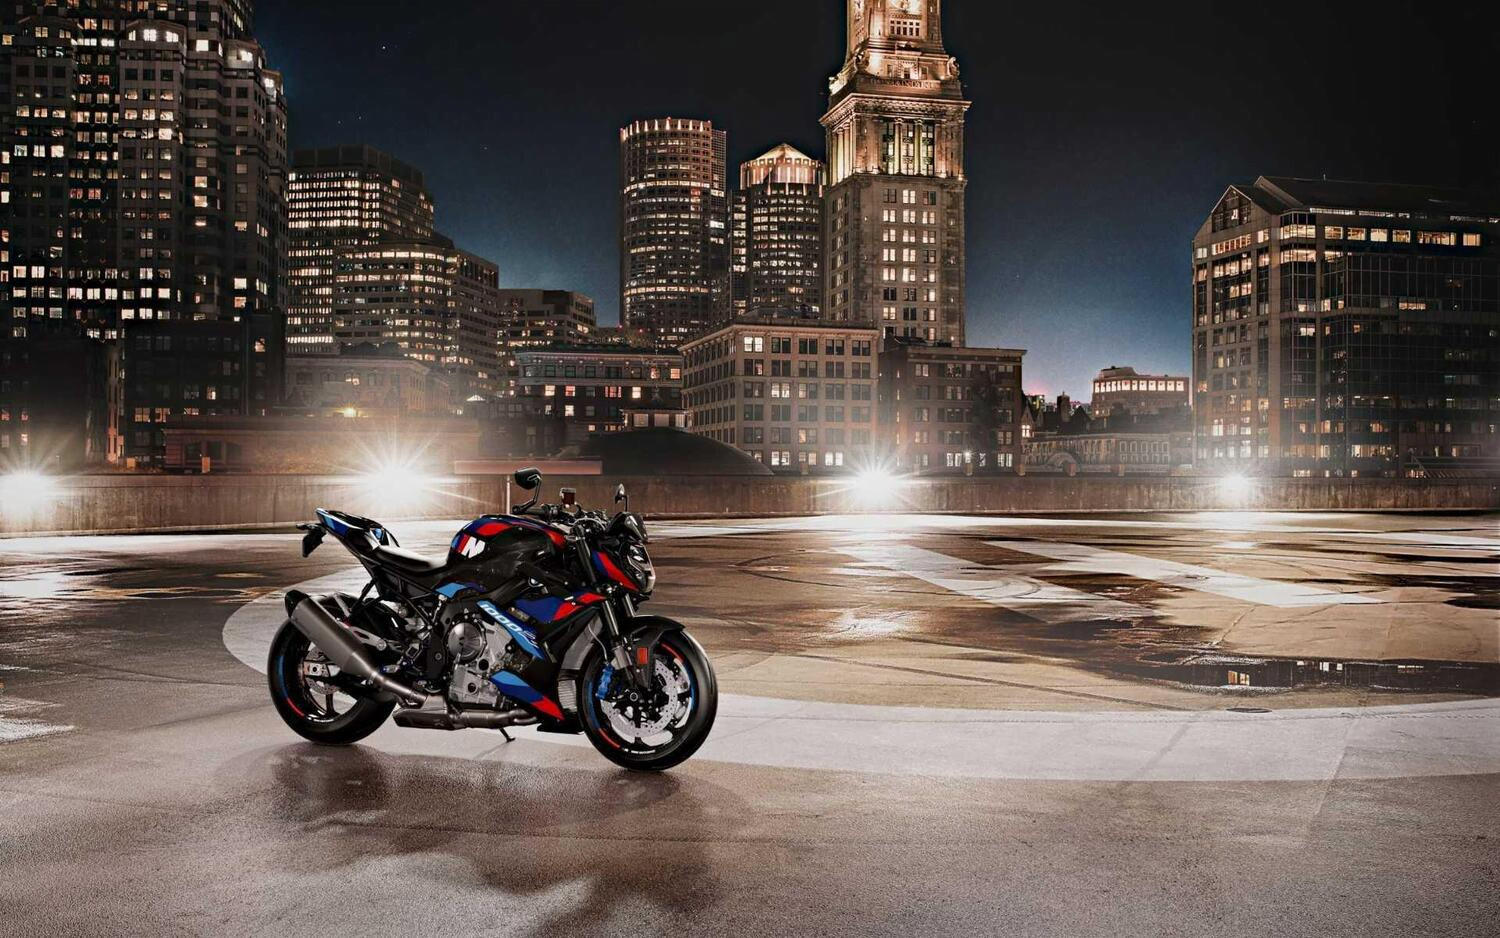 [Street] BMW M 1000 R, a roadster without compromise